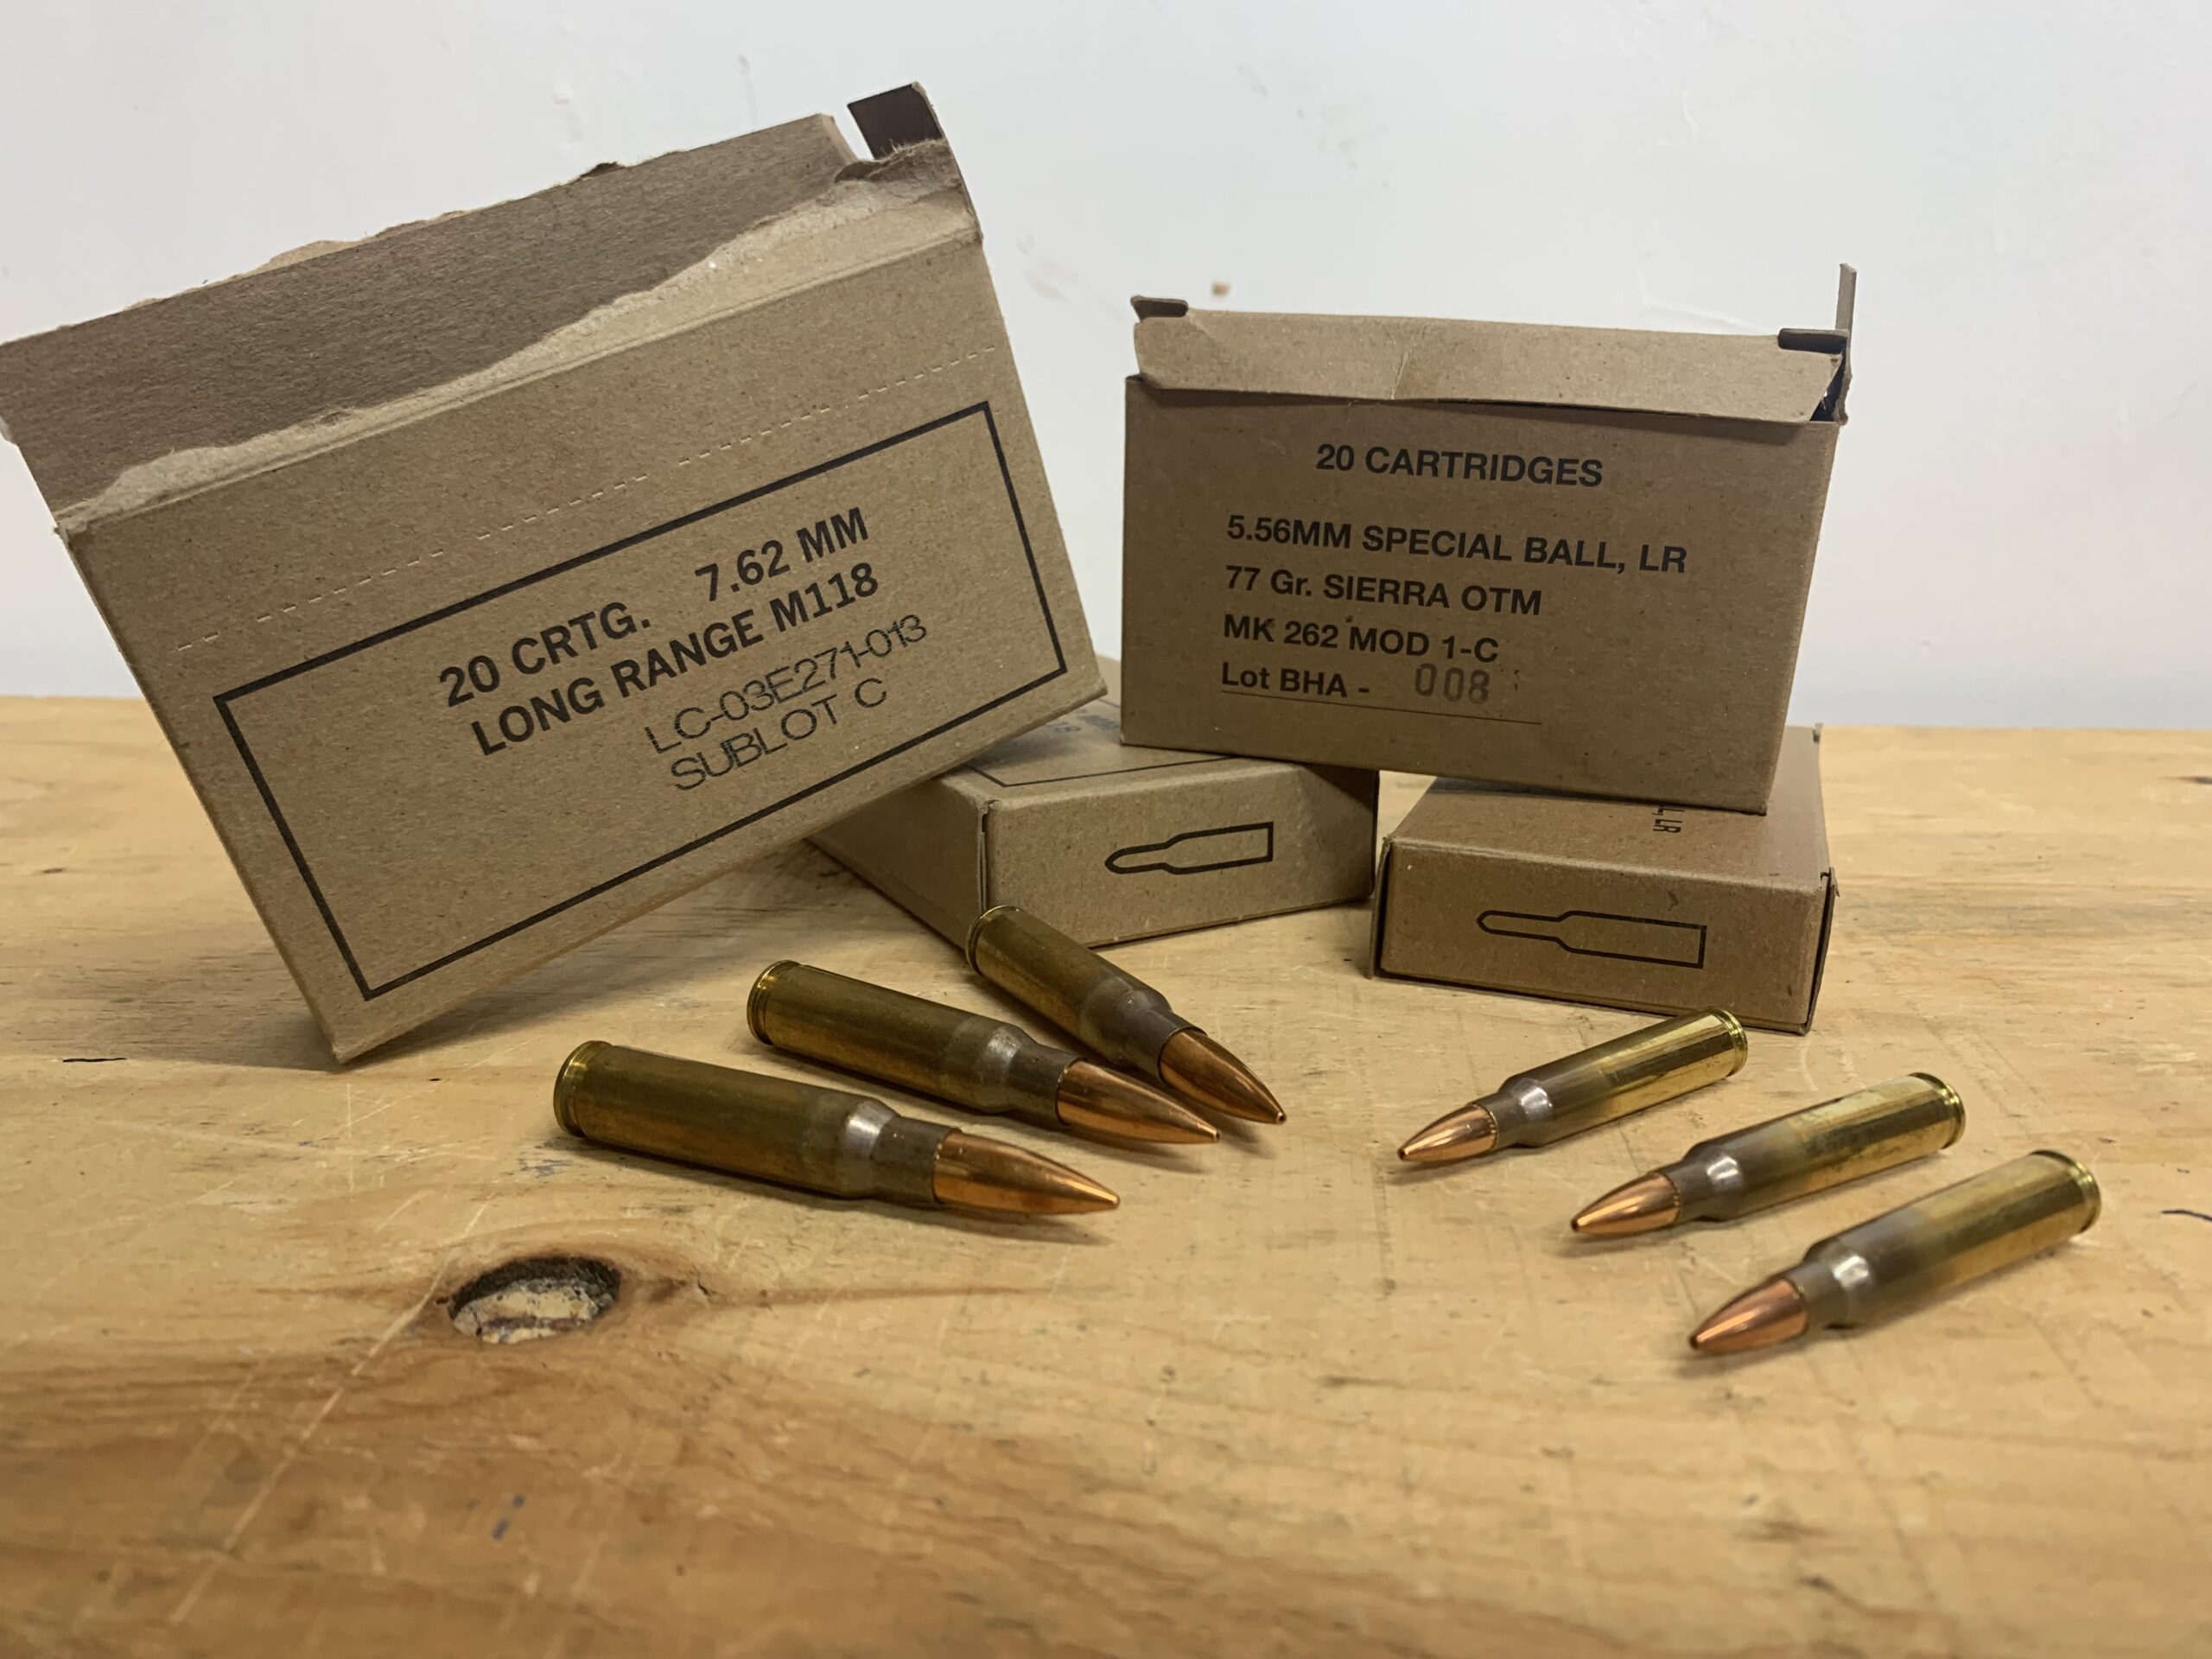 .308 and 5.56 match ammo